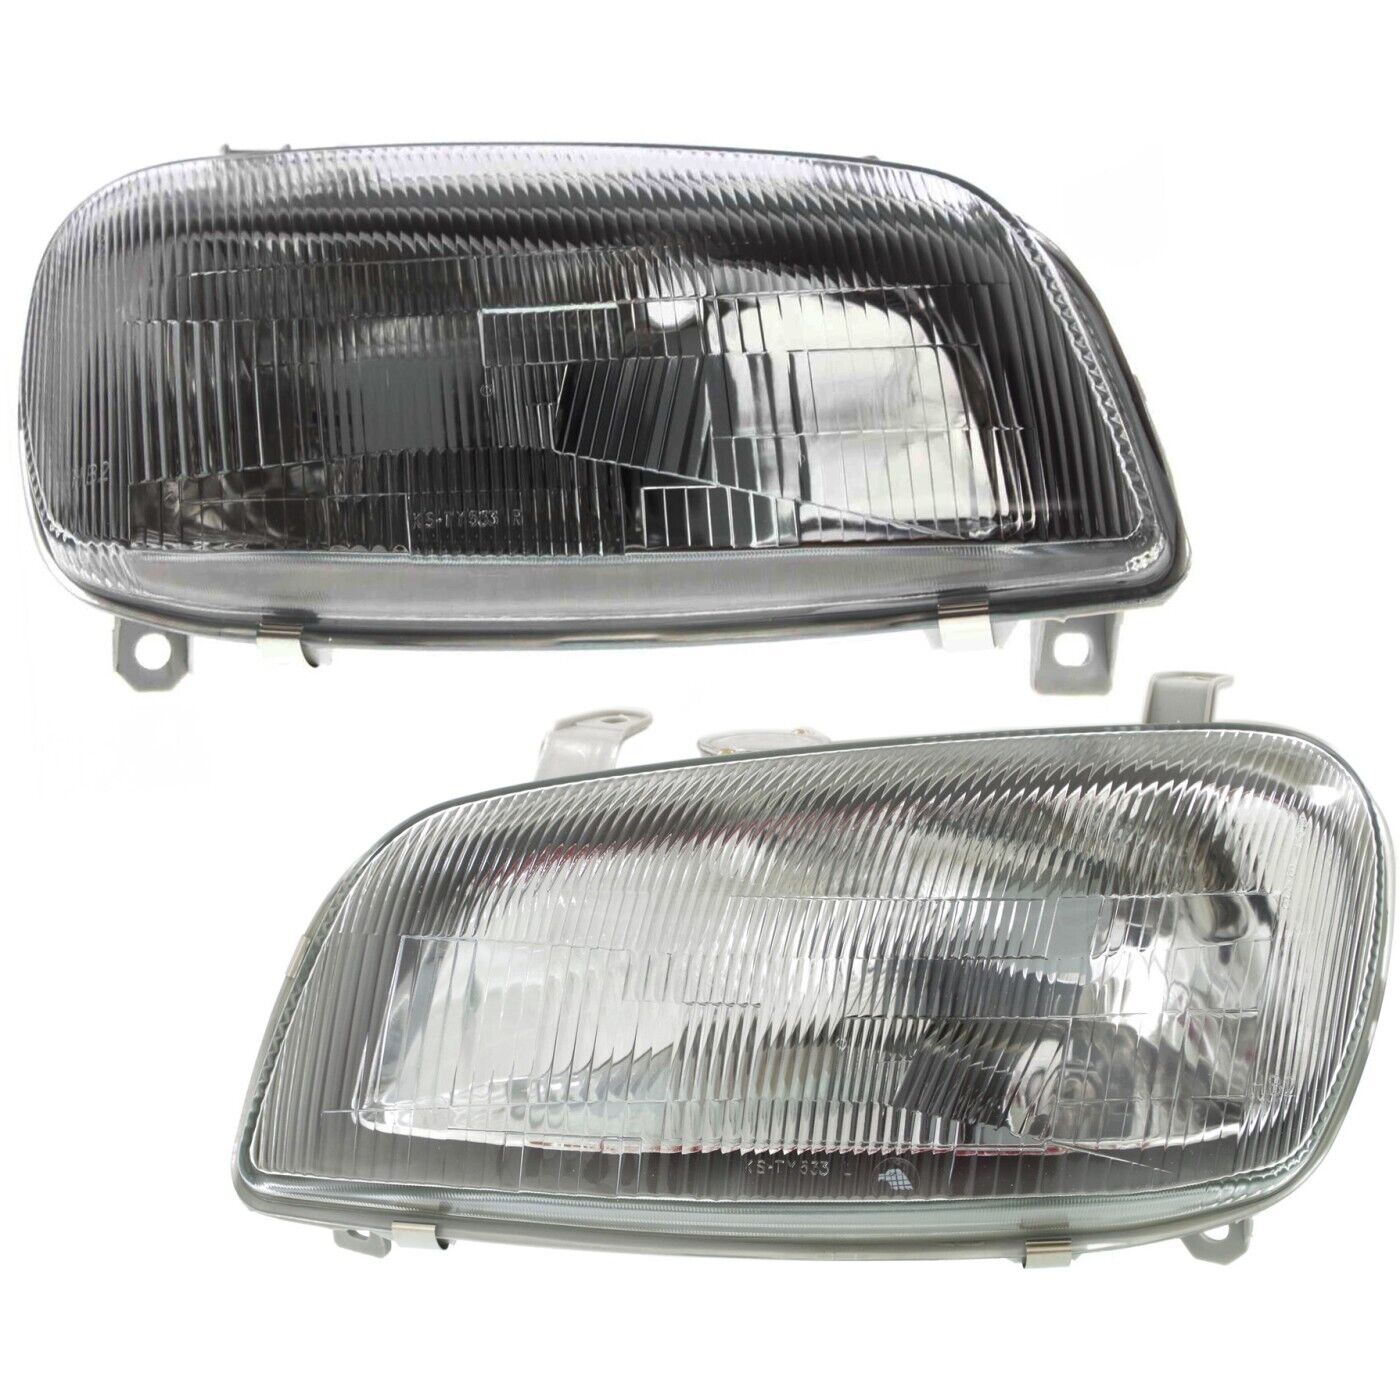 Headlight Set For 96-97 Toyota RAV4 Left and Right With Bulb 2Pc